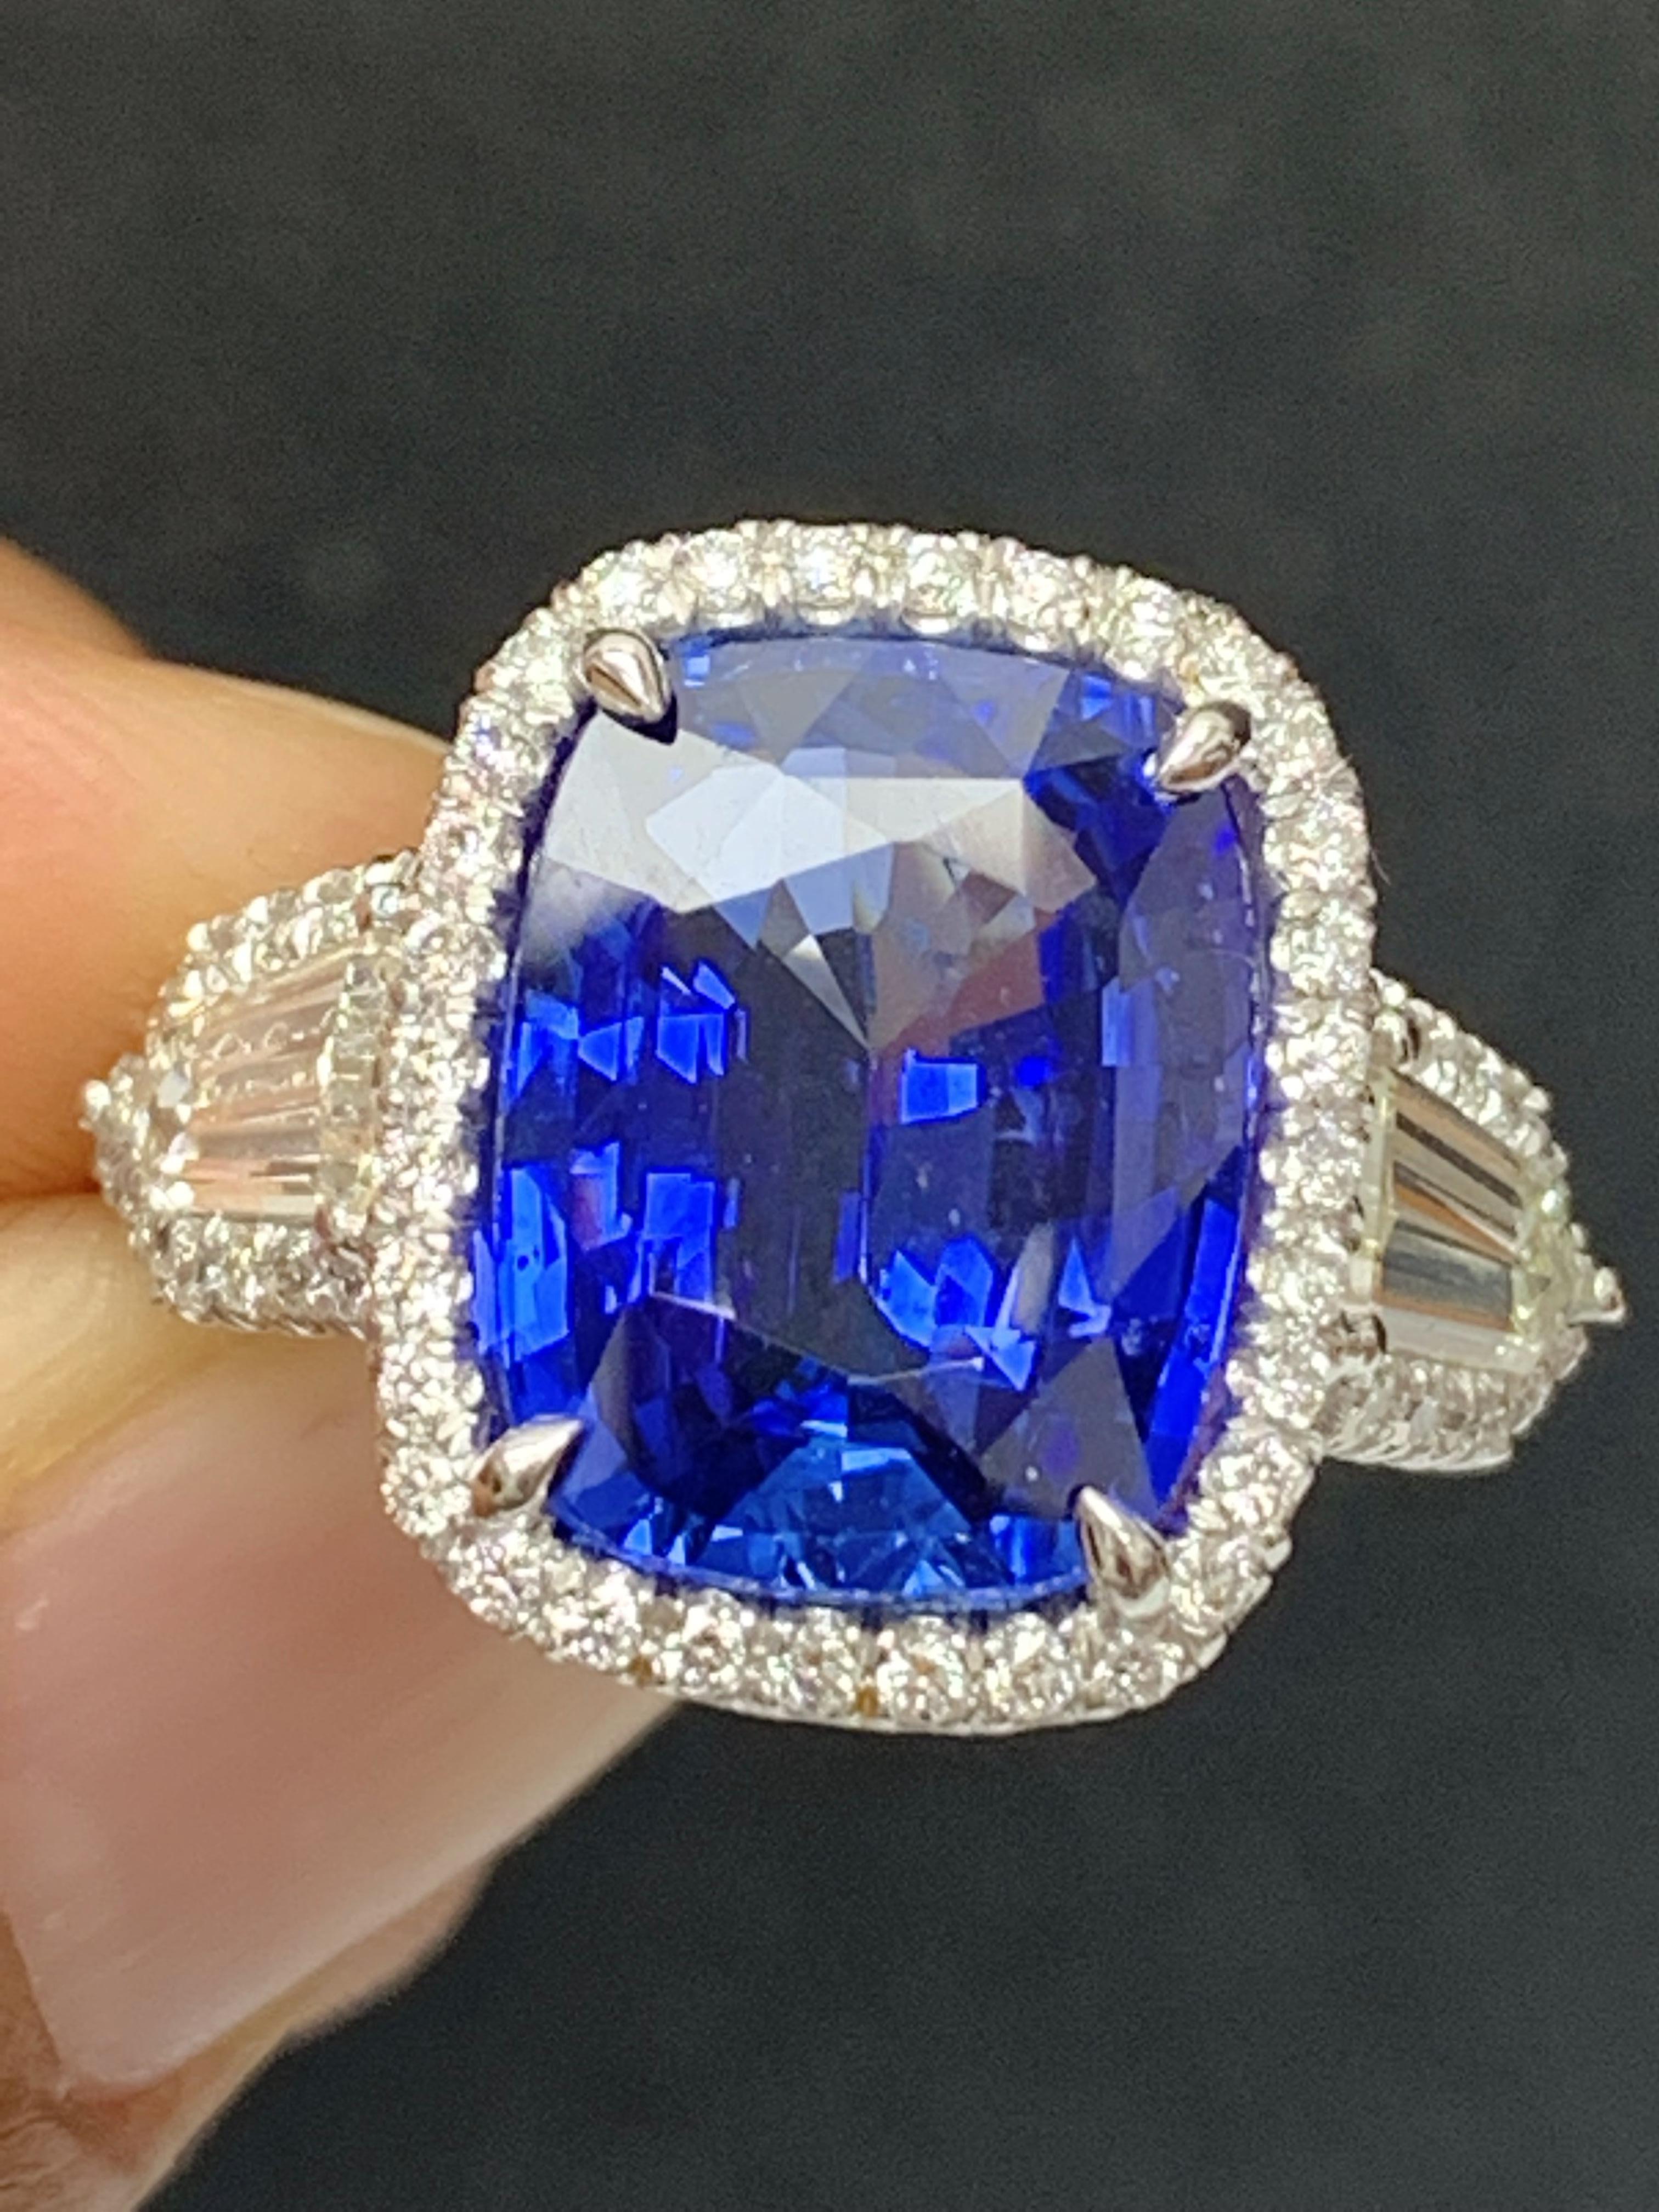 7.51 Carat Cushion Cut Sapphire and Diamond Engagement Ring in Platinum For Sale 4